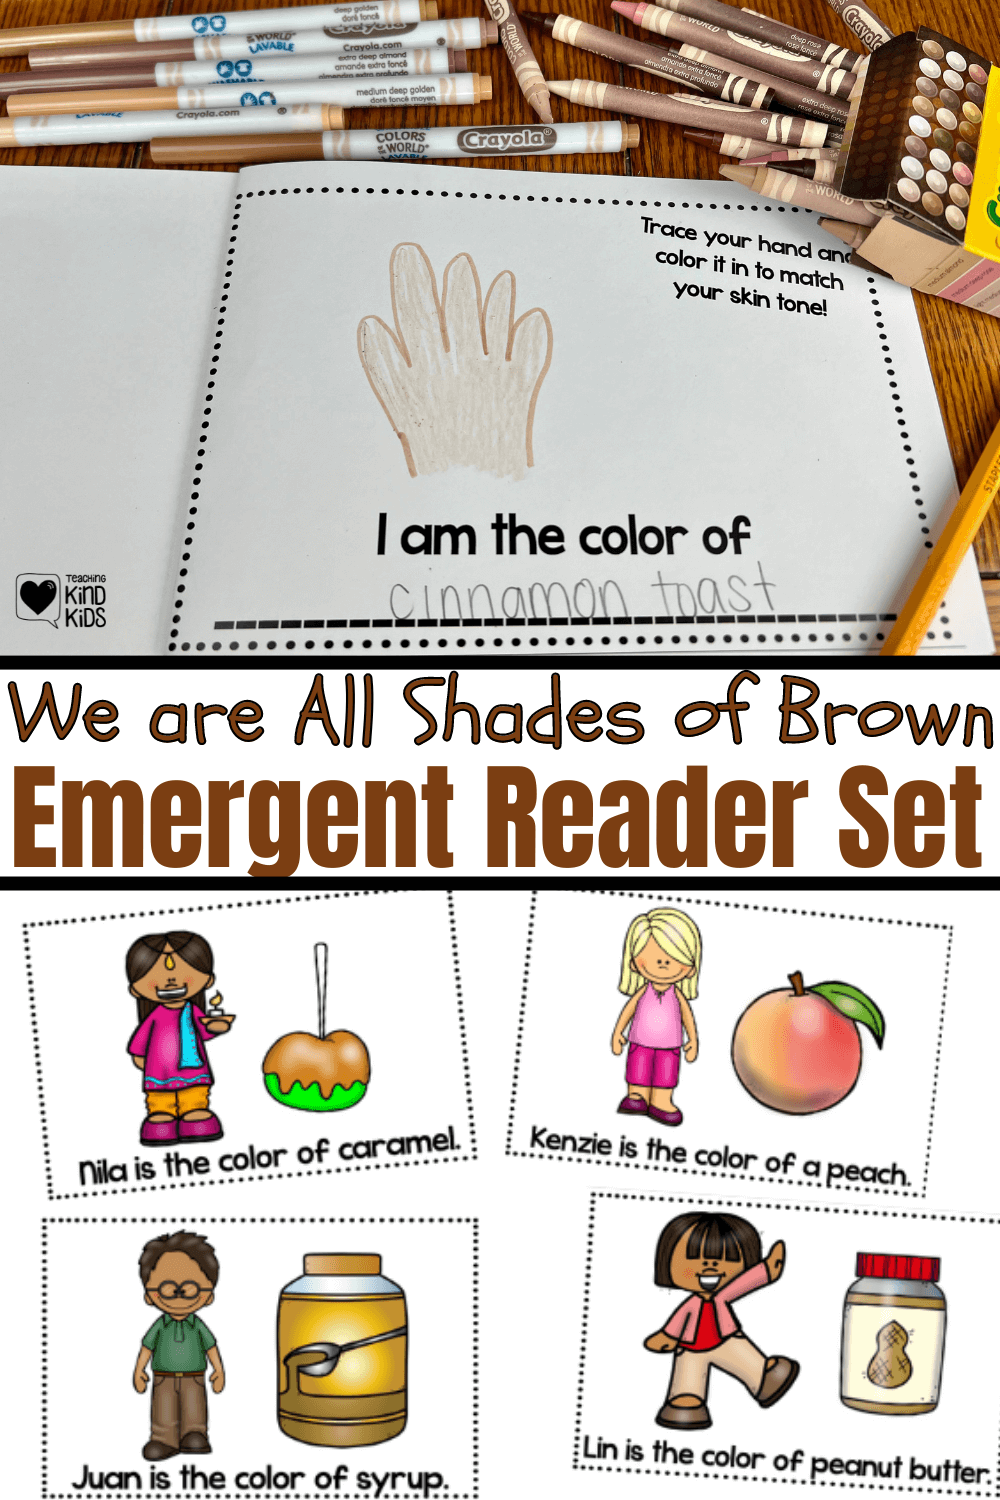 Use this We are all Shades of Brown Emergent Reader to celebrate our differences and our different skin colors.